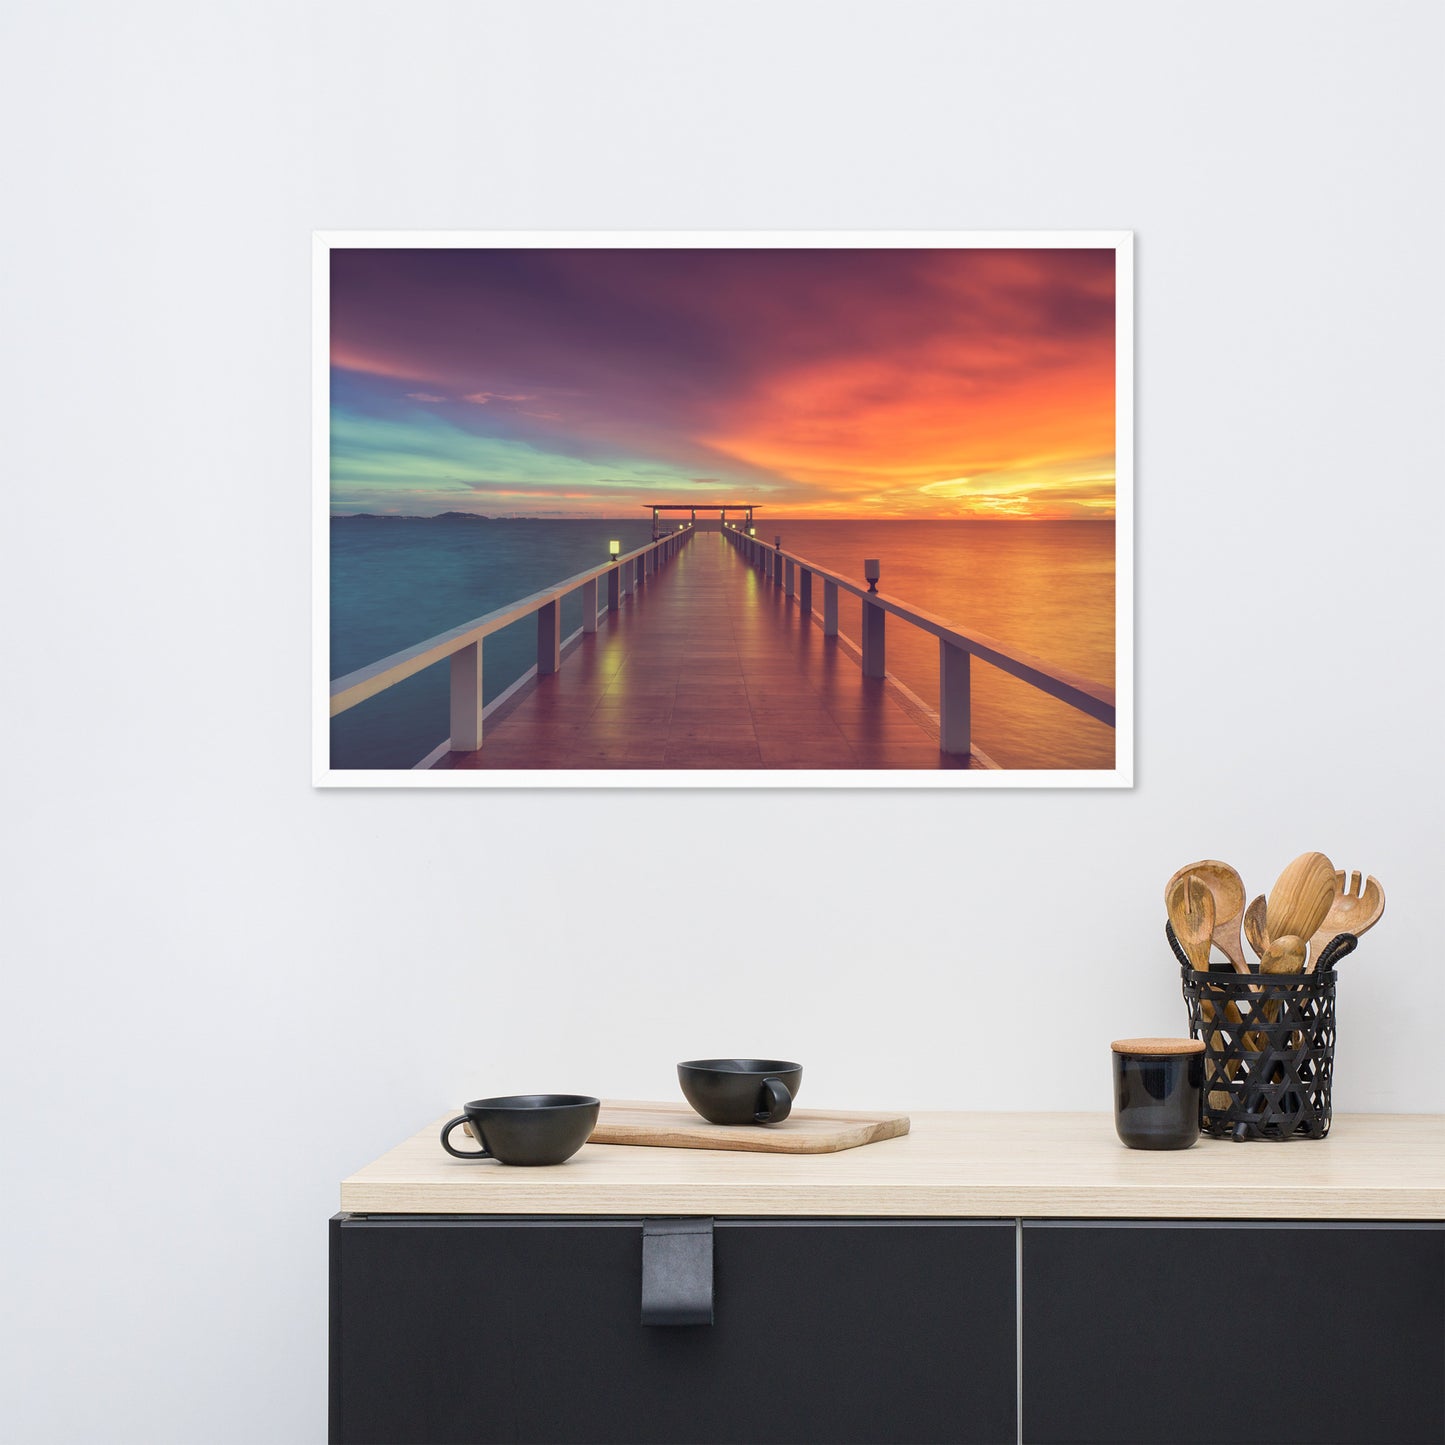 Framed Beach Wall Art: Surreal Wooden Pier At Sunset with Intrigued Effect - Coastal / Seascape / Nature / Landscape Photo Framed Artwork - Wall Decor